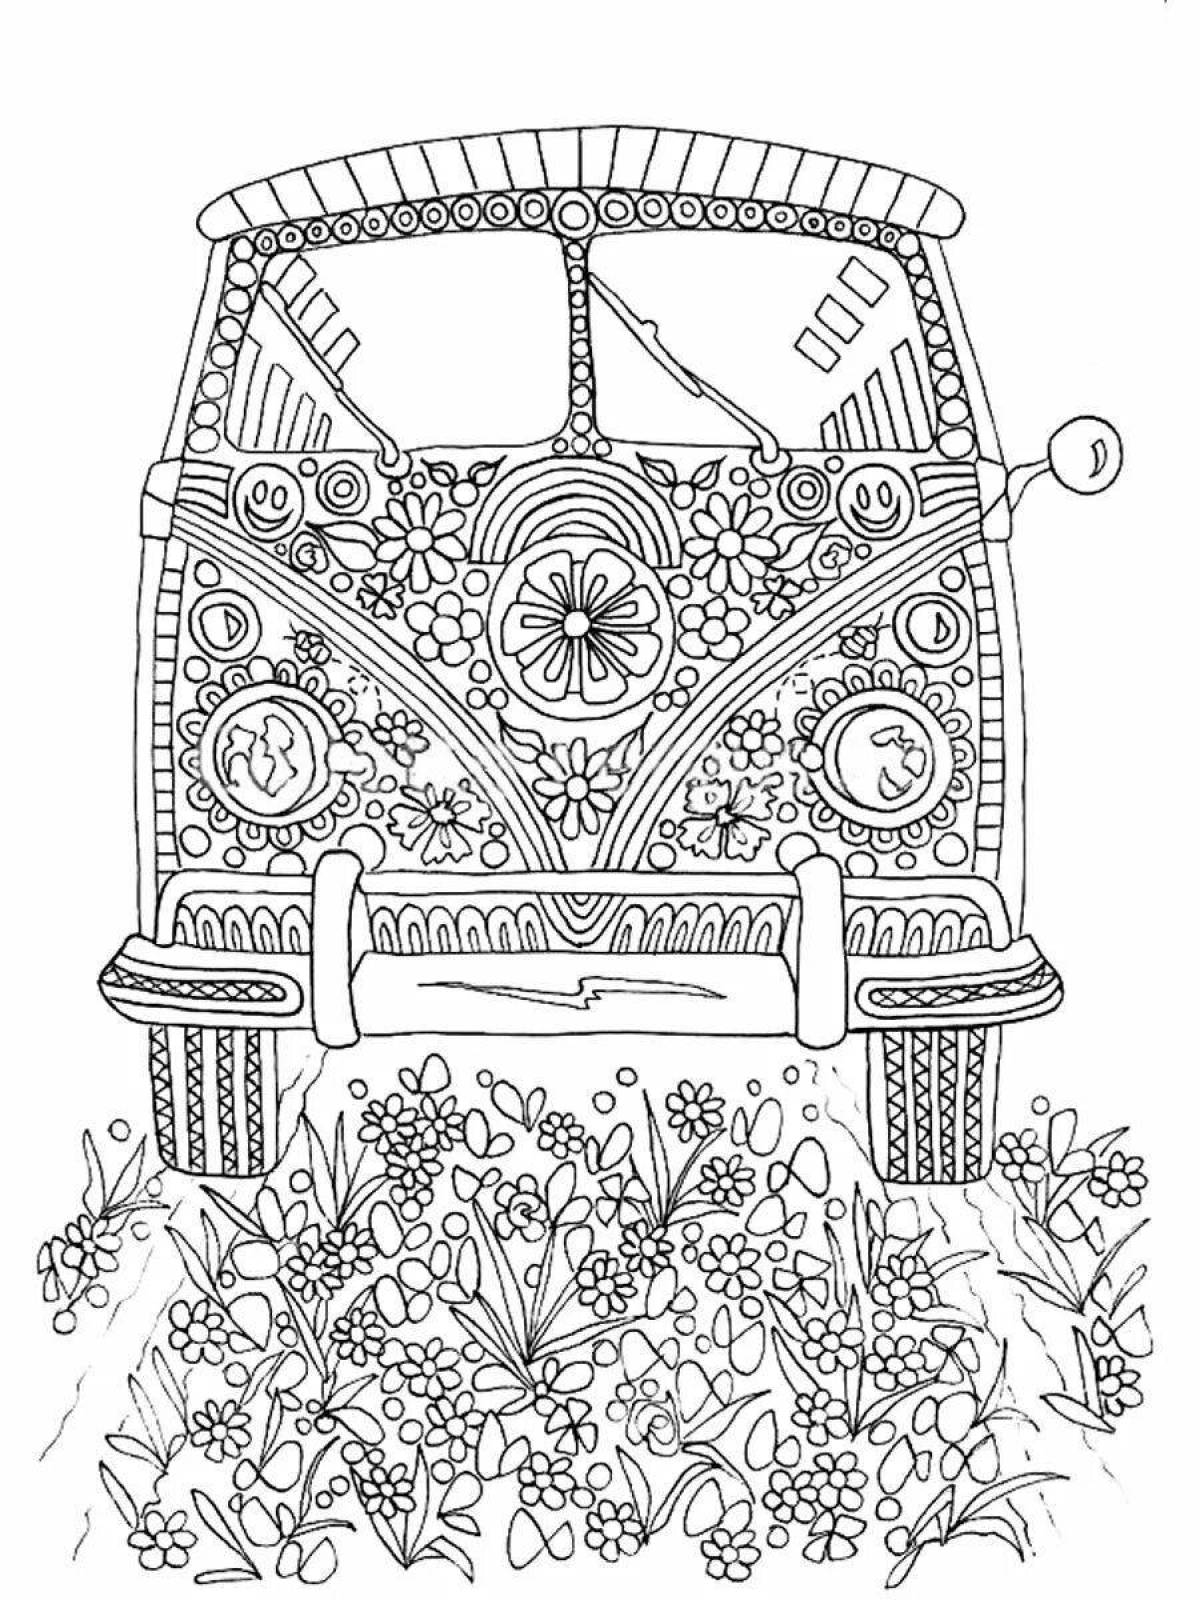 Playful hippie coloring page